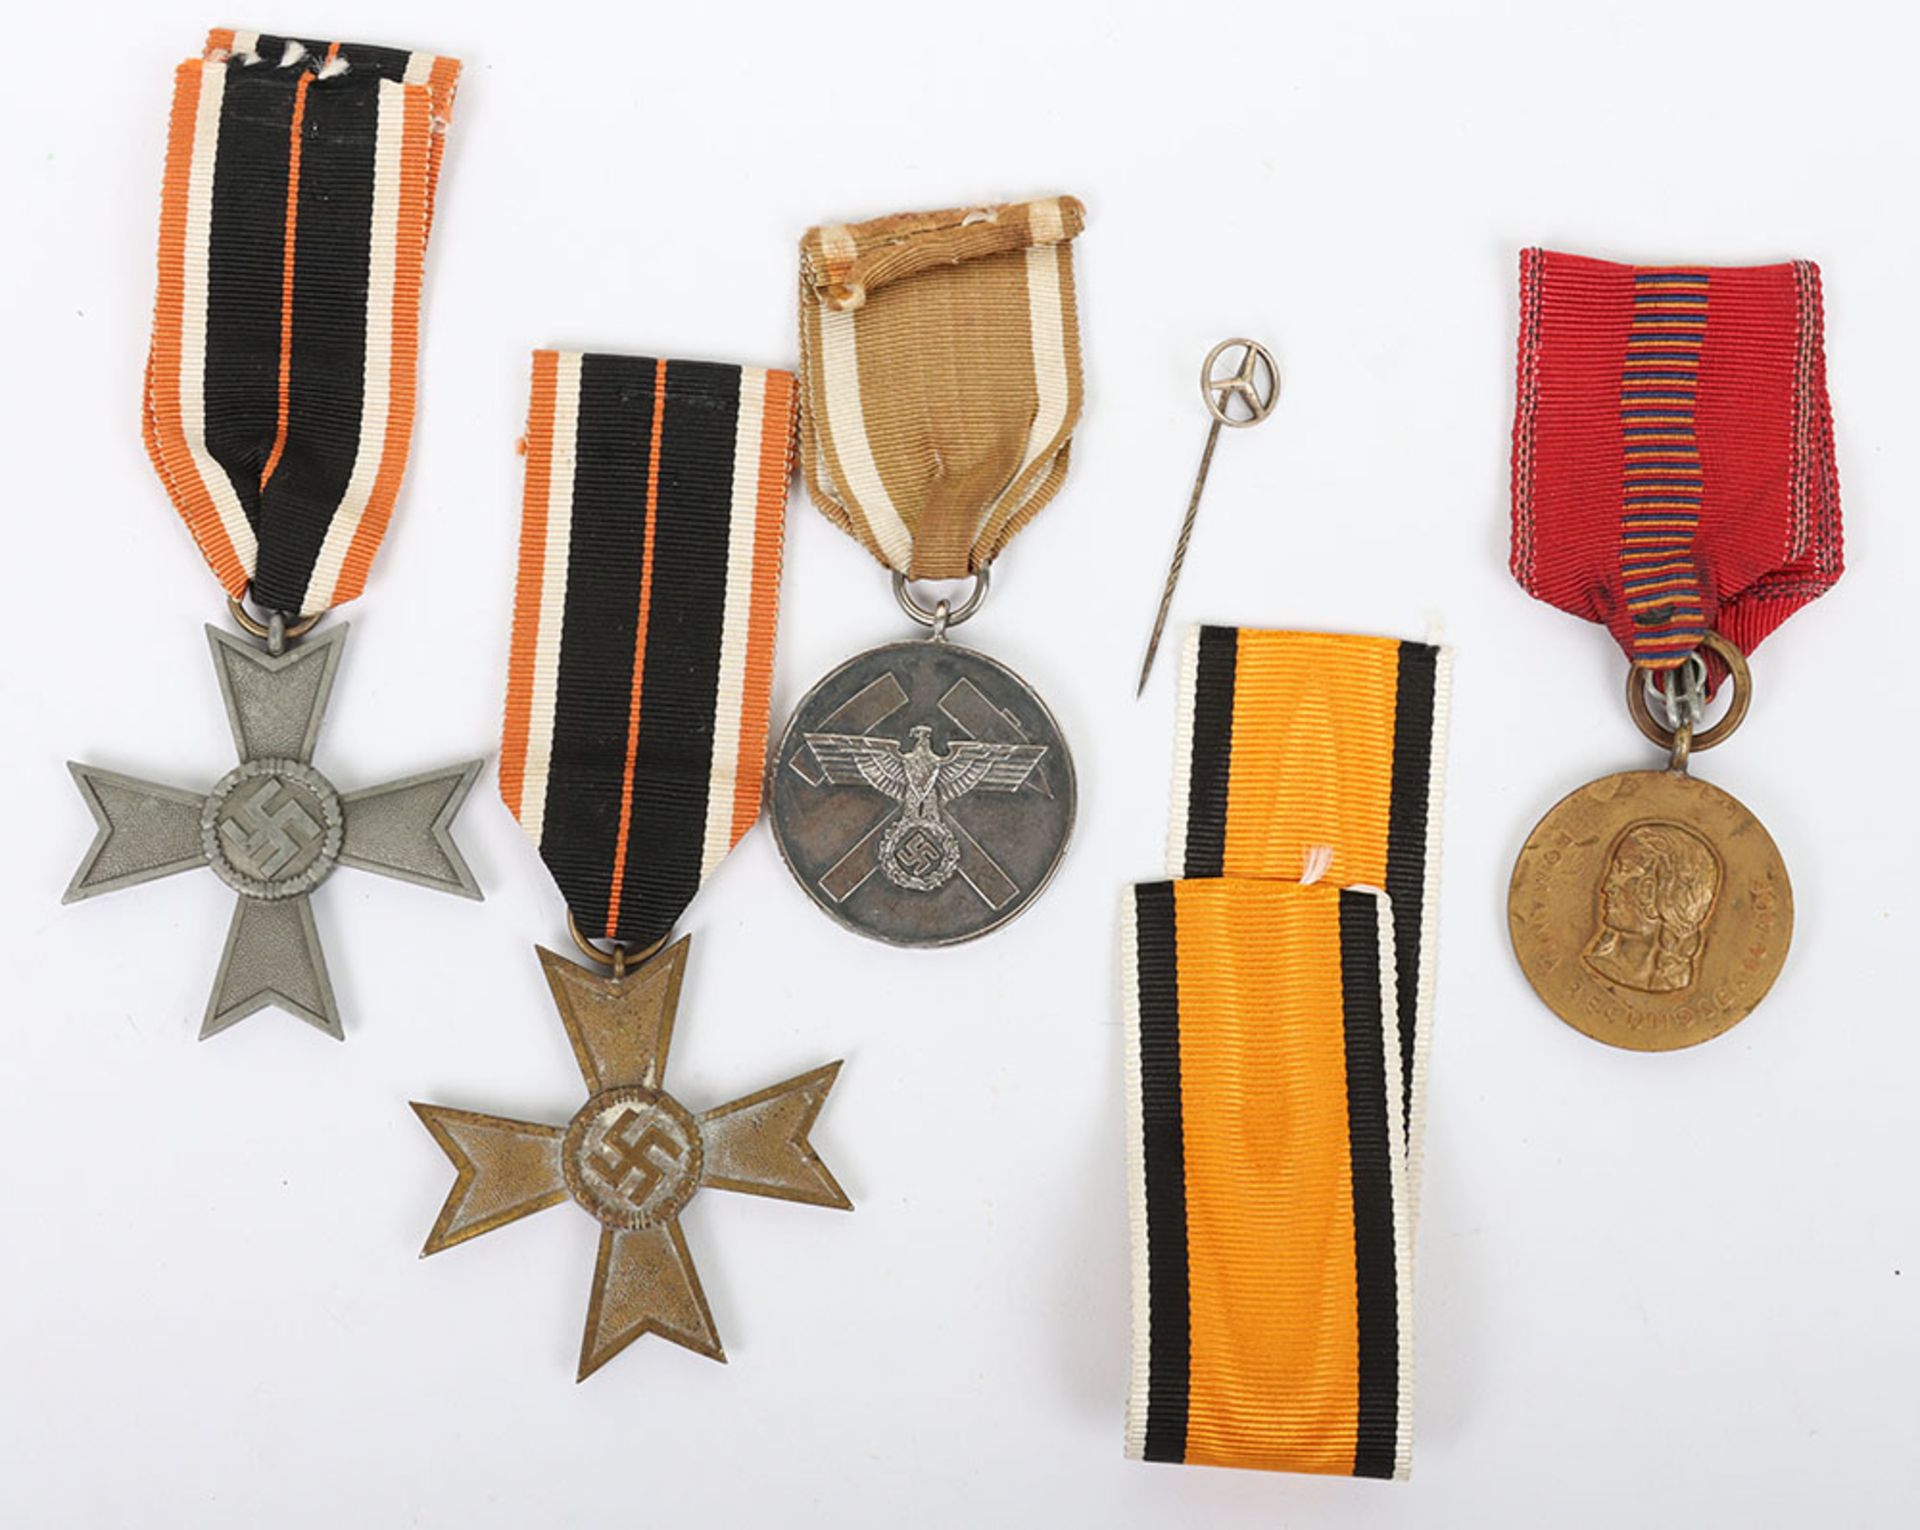 WW2 German War Service Cross 2nd class Without Swords - Image 2 of 3